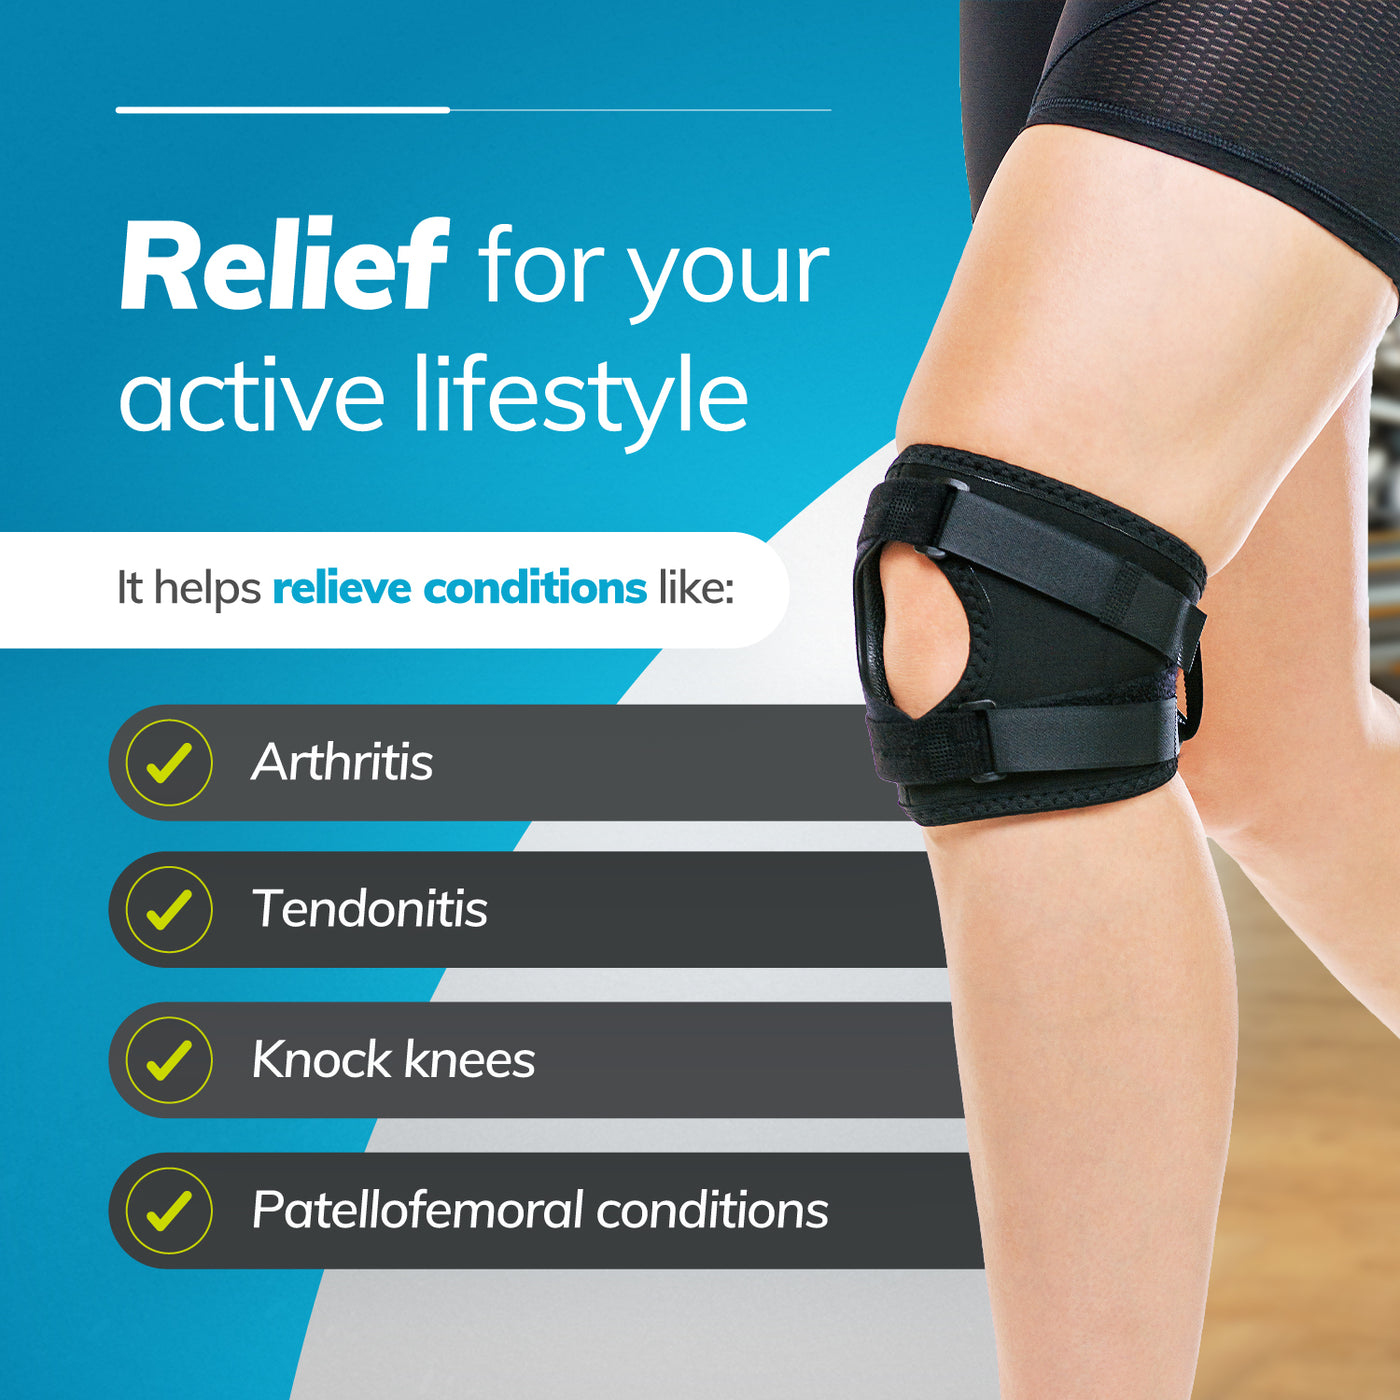 Relieve knee pain from arthritis, tendonitis, and knock knees with the BraceAbility short patella tracking knee brace